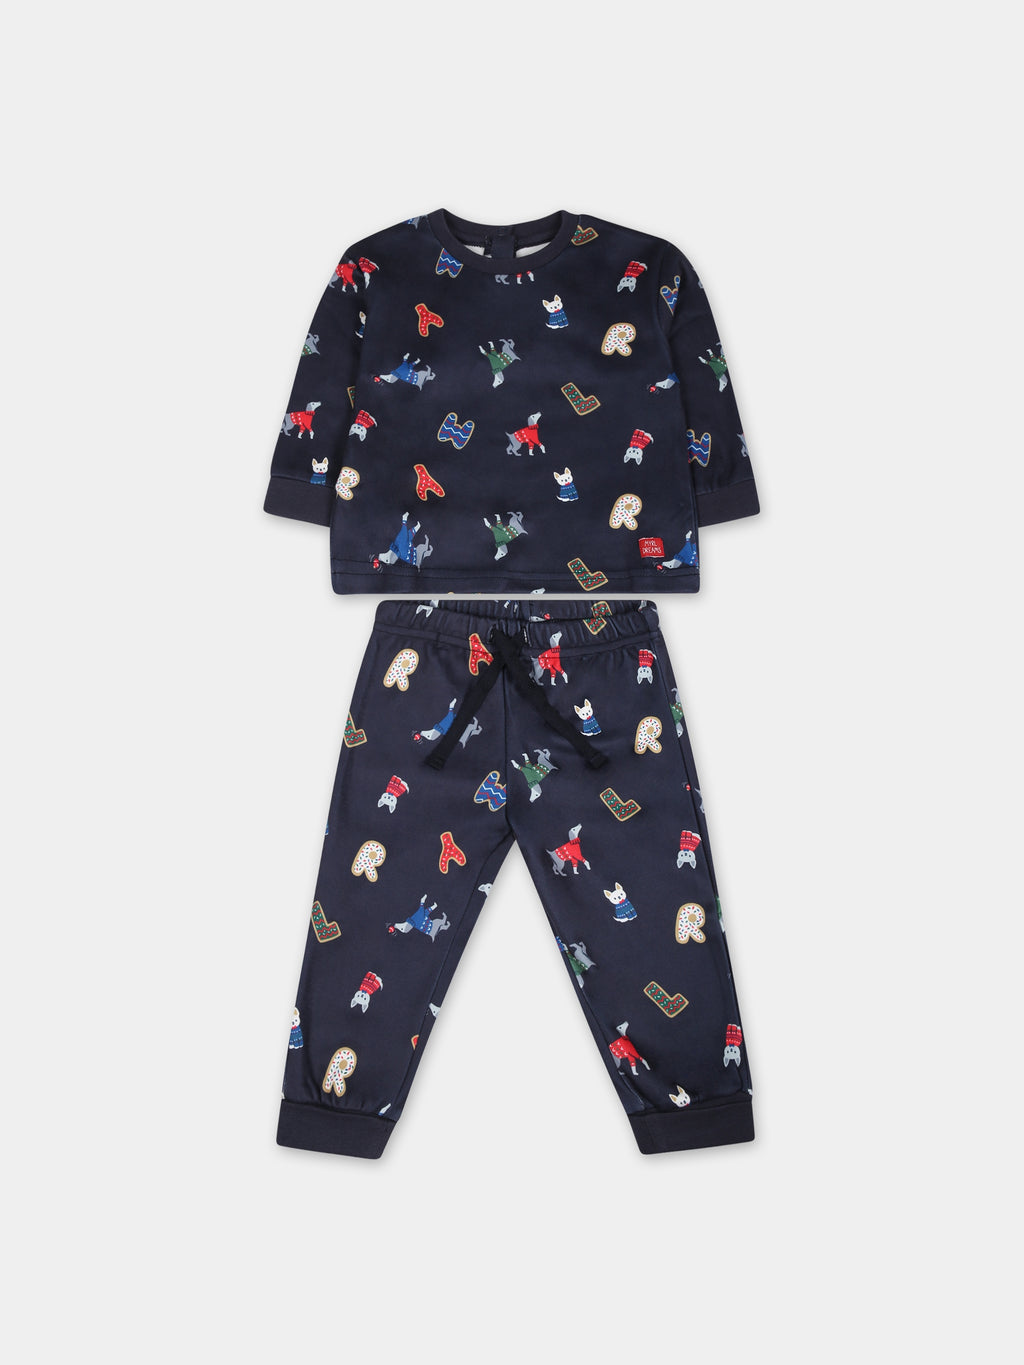 Blue pajamas for baby boy with animals print